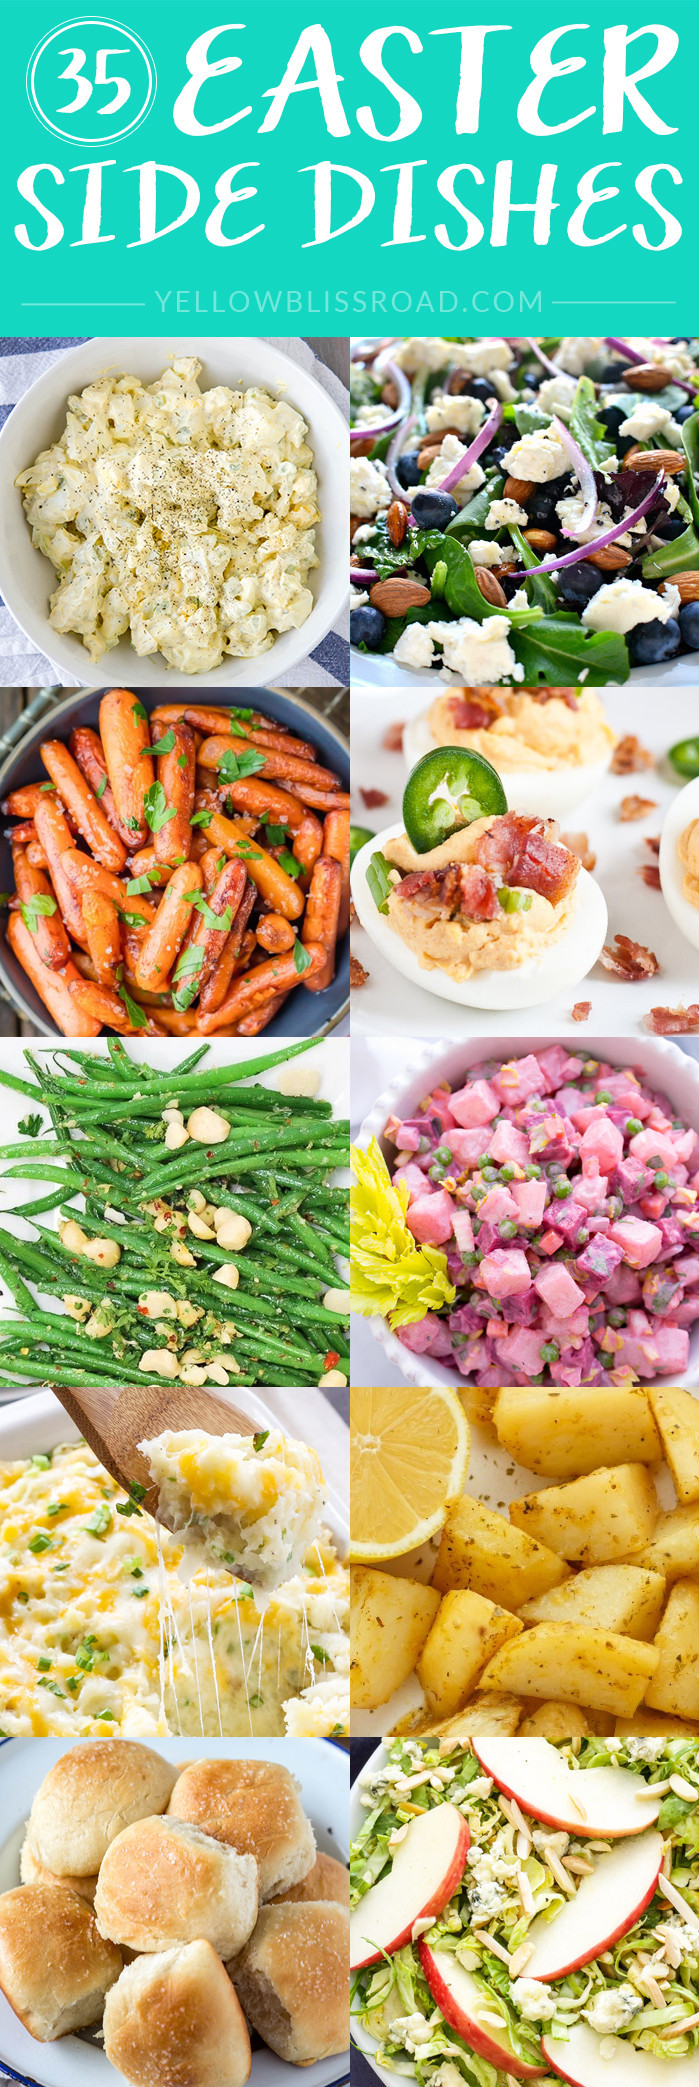 Side Dishes For Easter
 Easter Side Dishes More than 50 of the Best Sides for